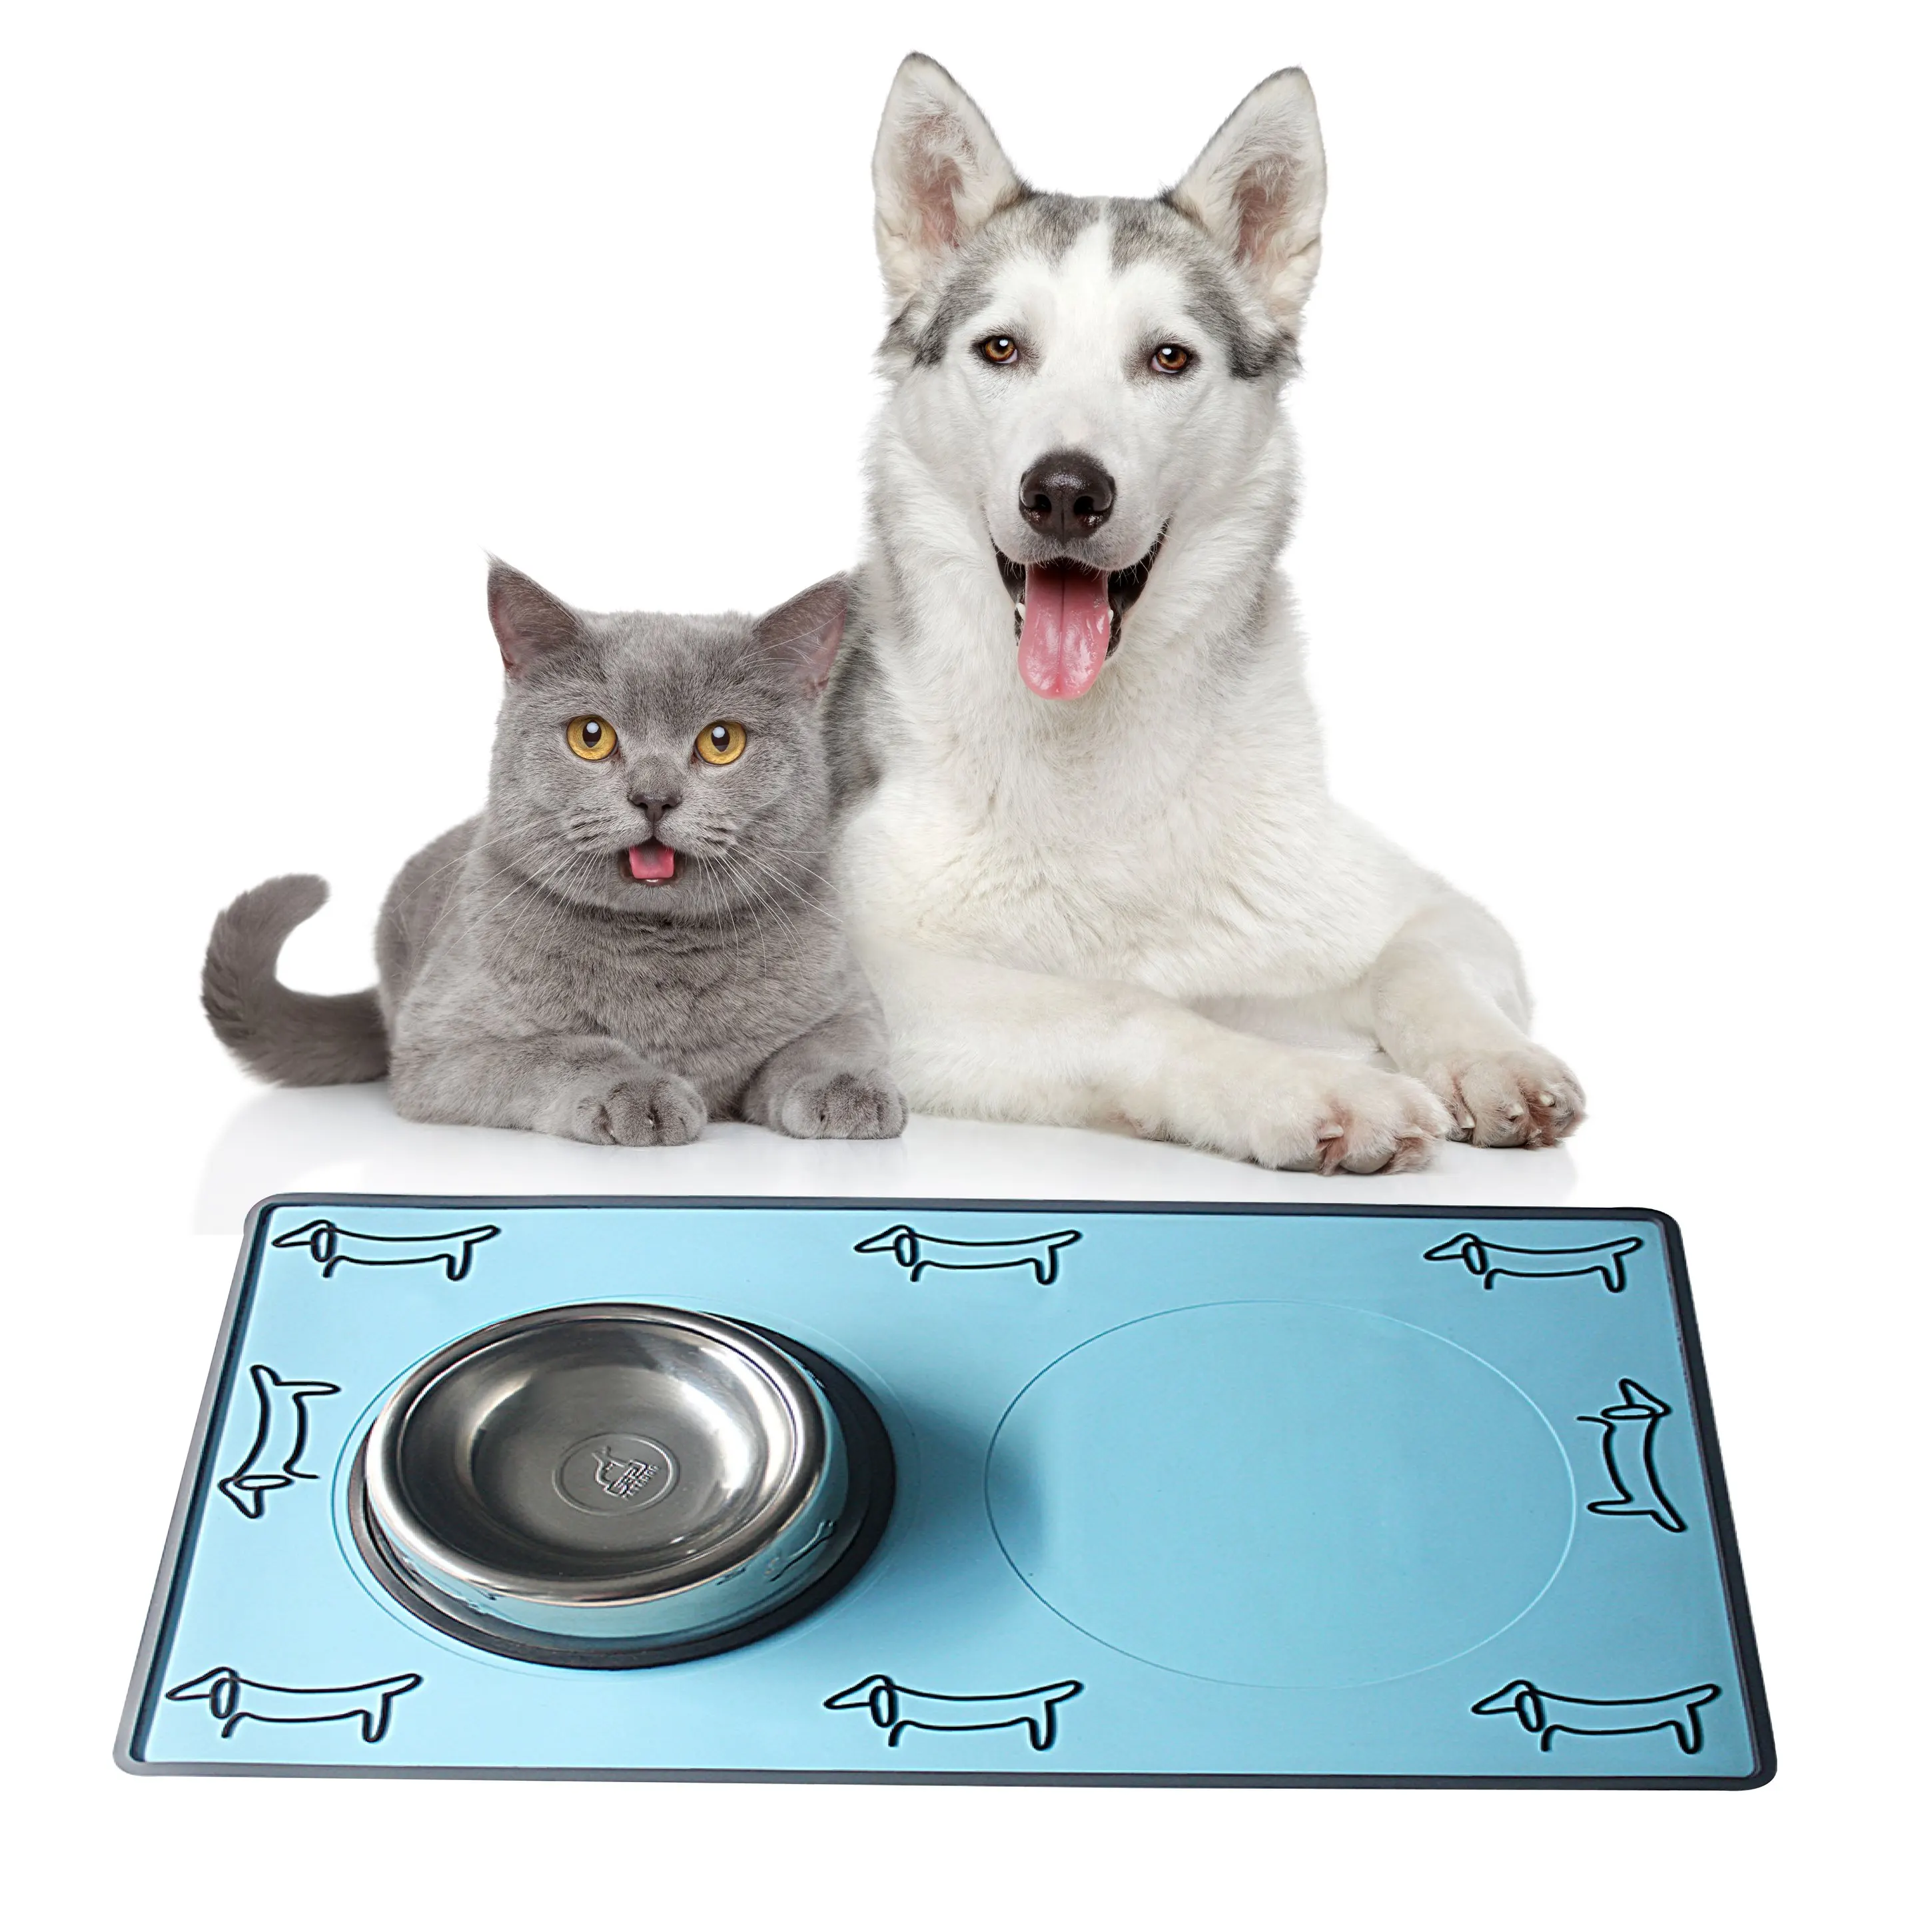 

Different colors fashion design pet shop feeding pvc silicone food grade pet mat, Any pantone color customized